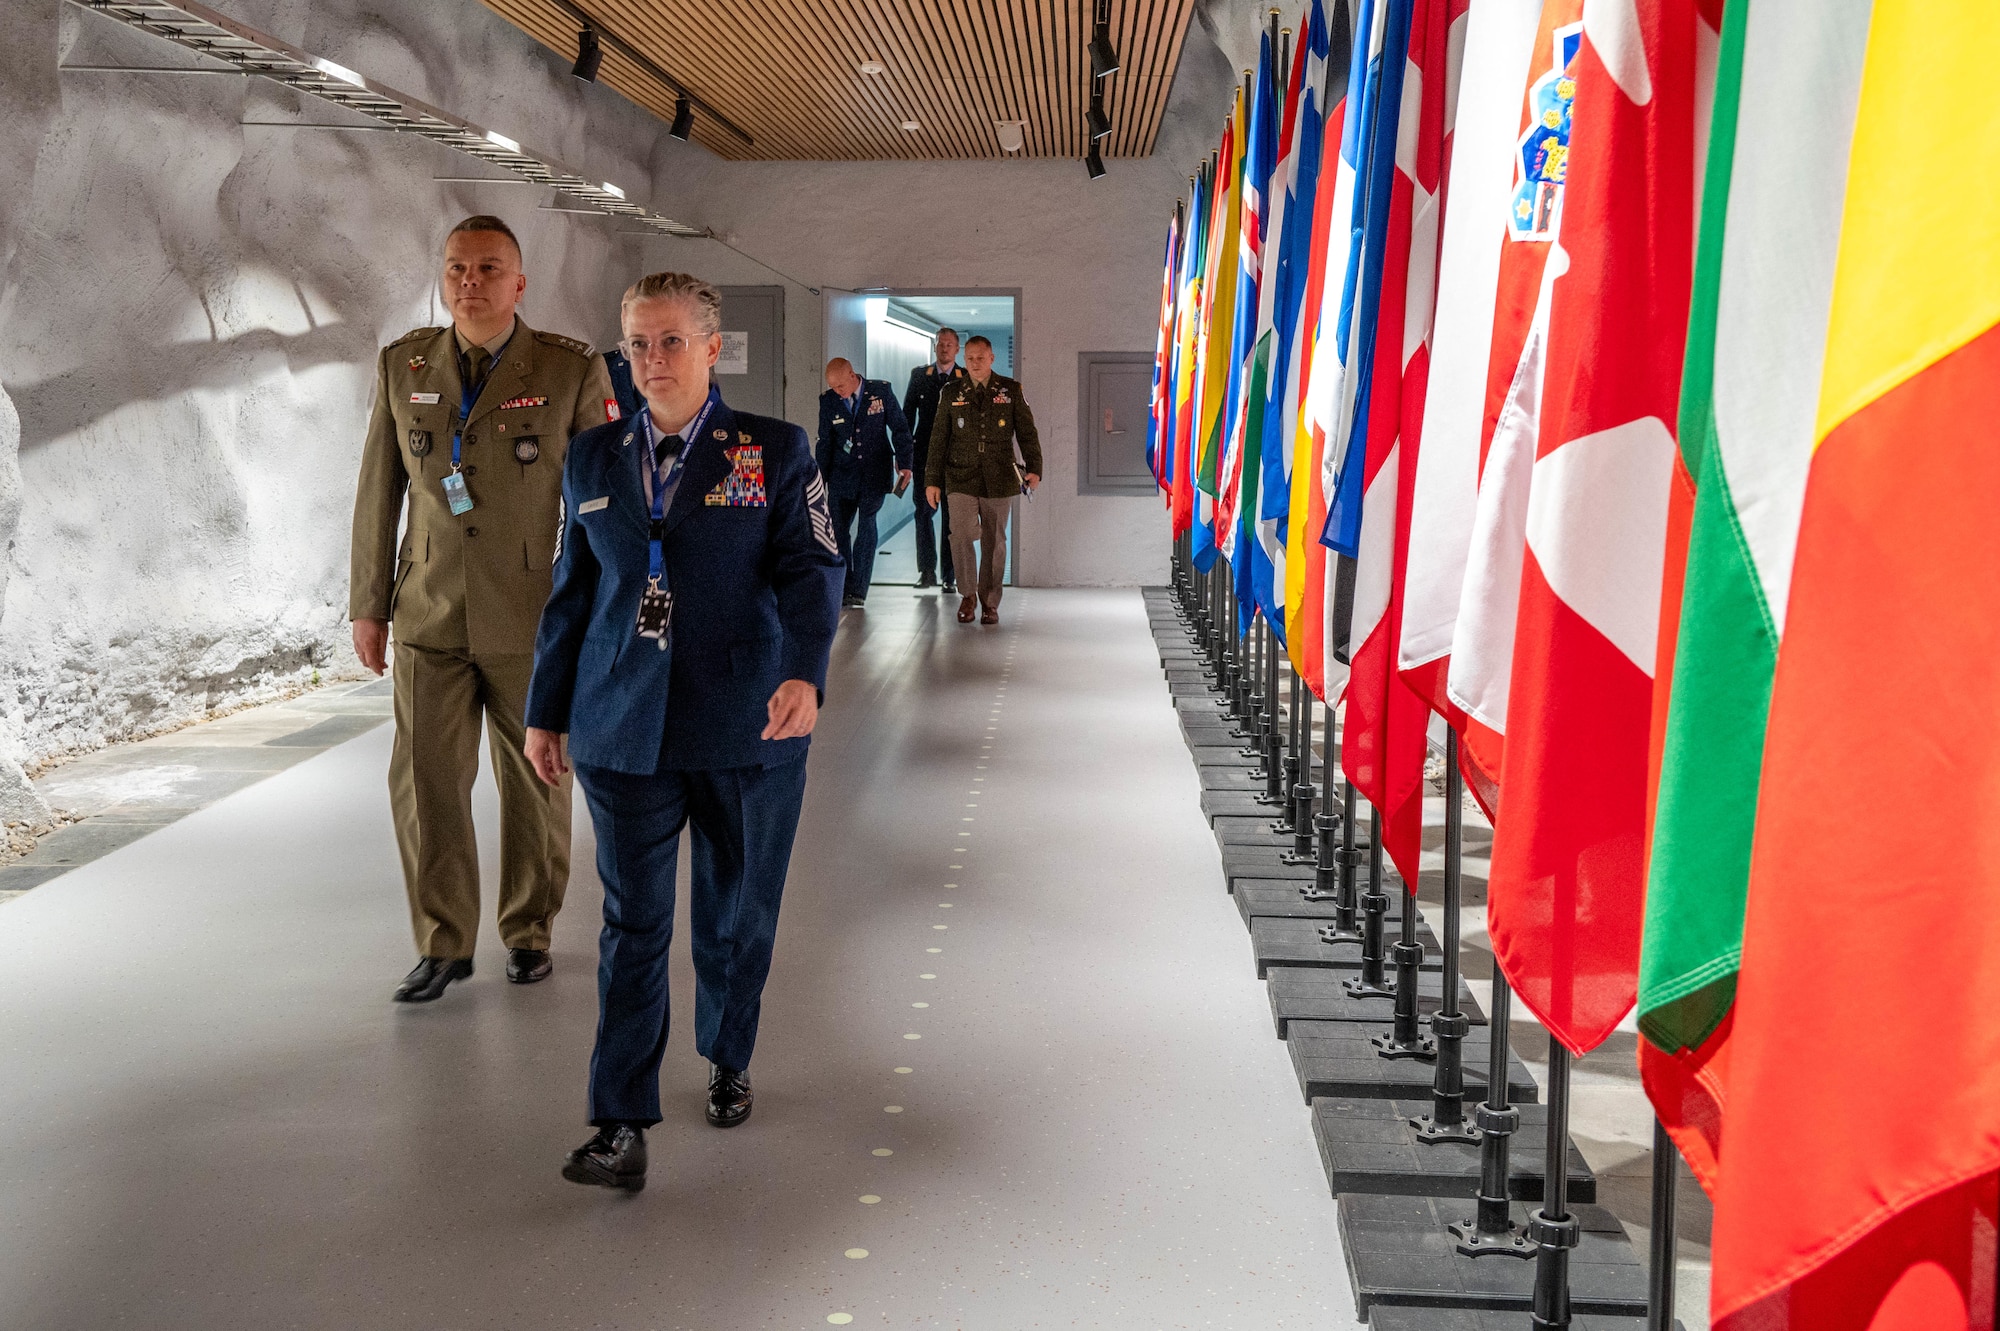 A tour group walks down a hallway near flags from different NATO member countries.